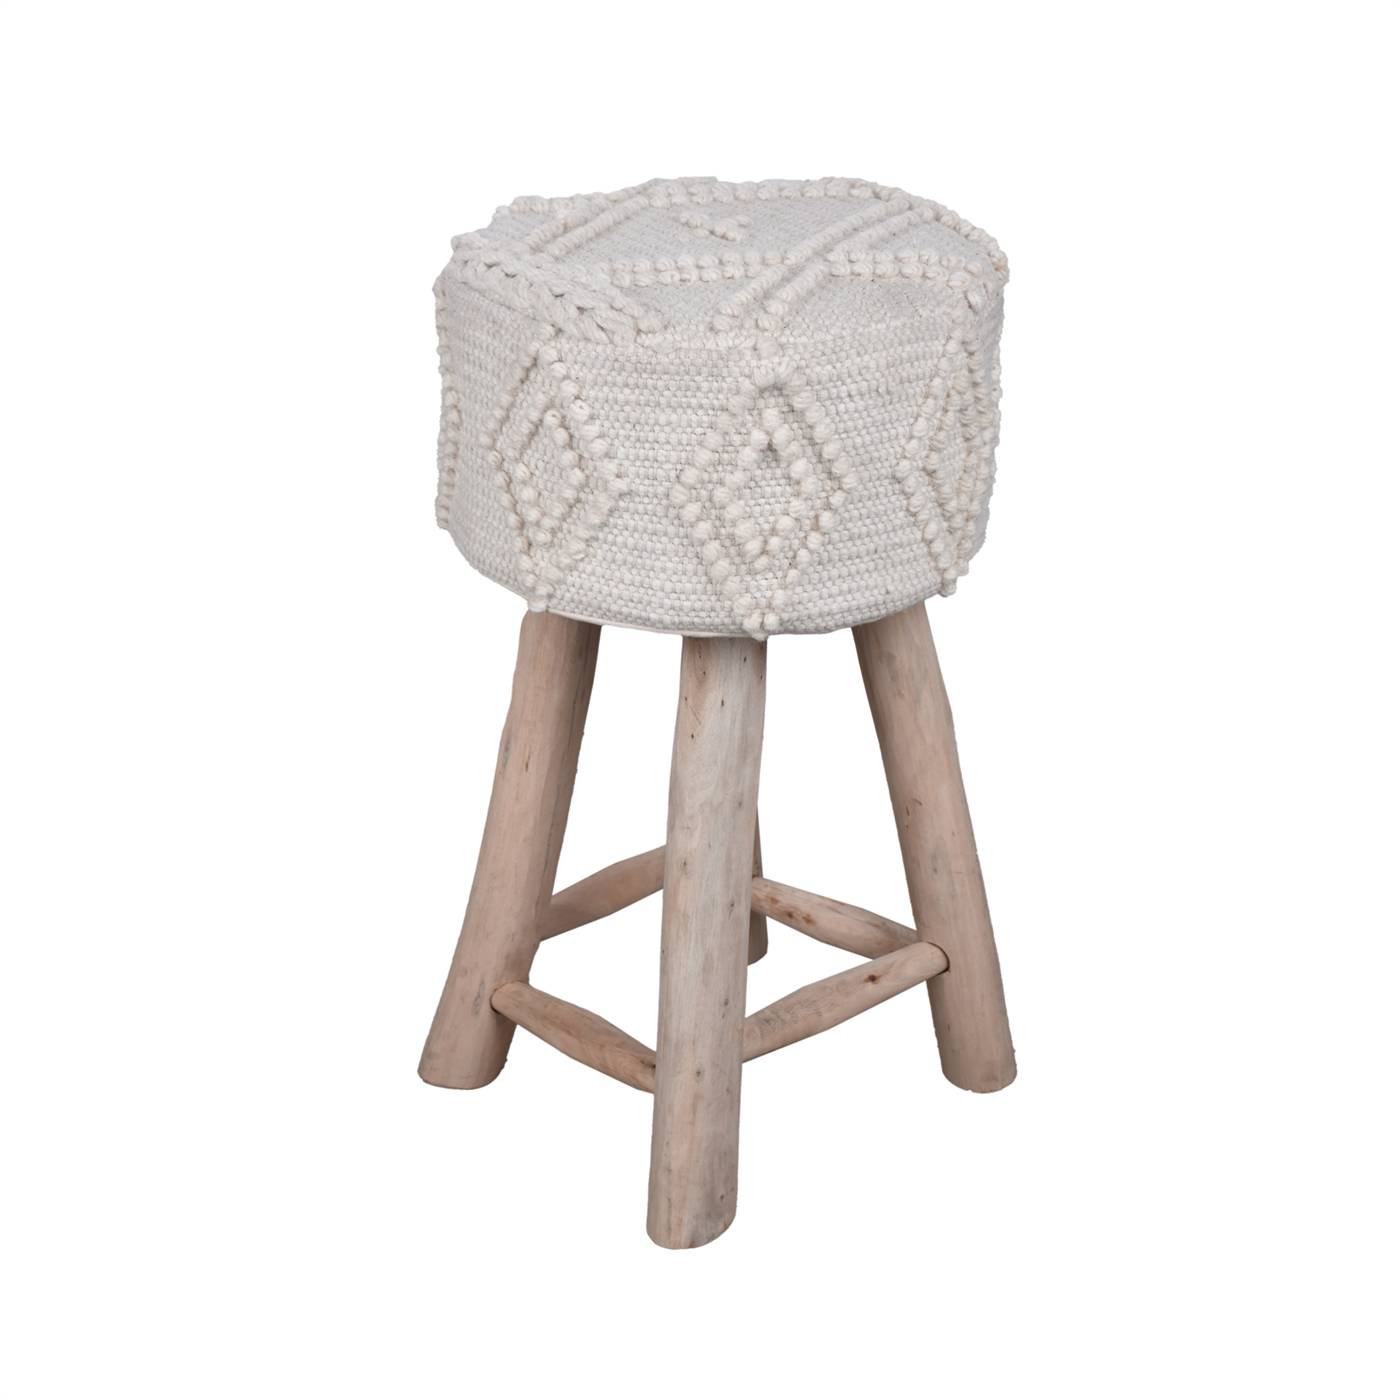 Fossa Bar Stool, 40x40x70 cm, Natural White, Wool, Hand Woven, Pitloom, All Loop